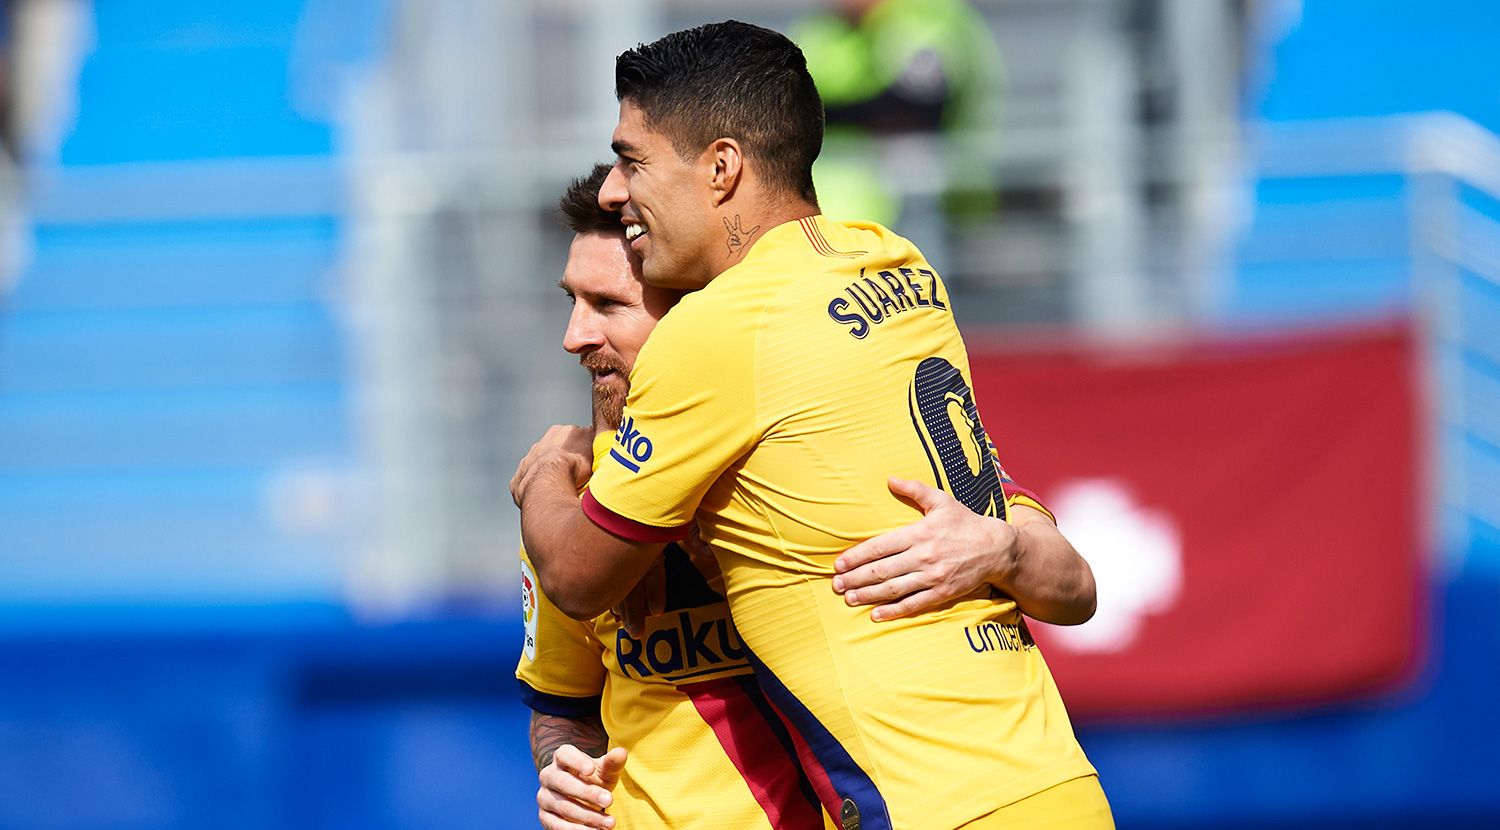 Luis Suárez and Messi celebrate a together goal